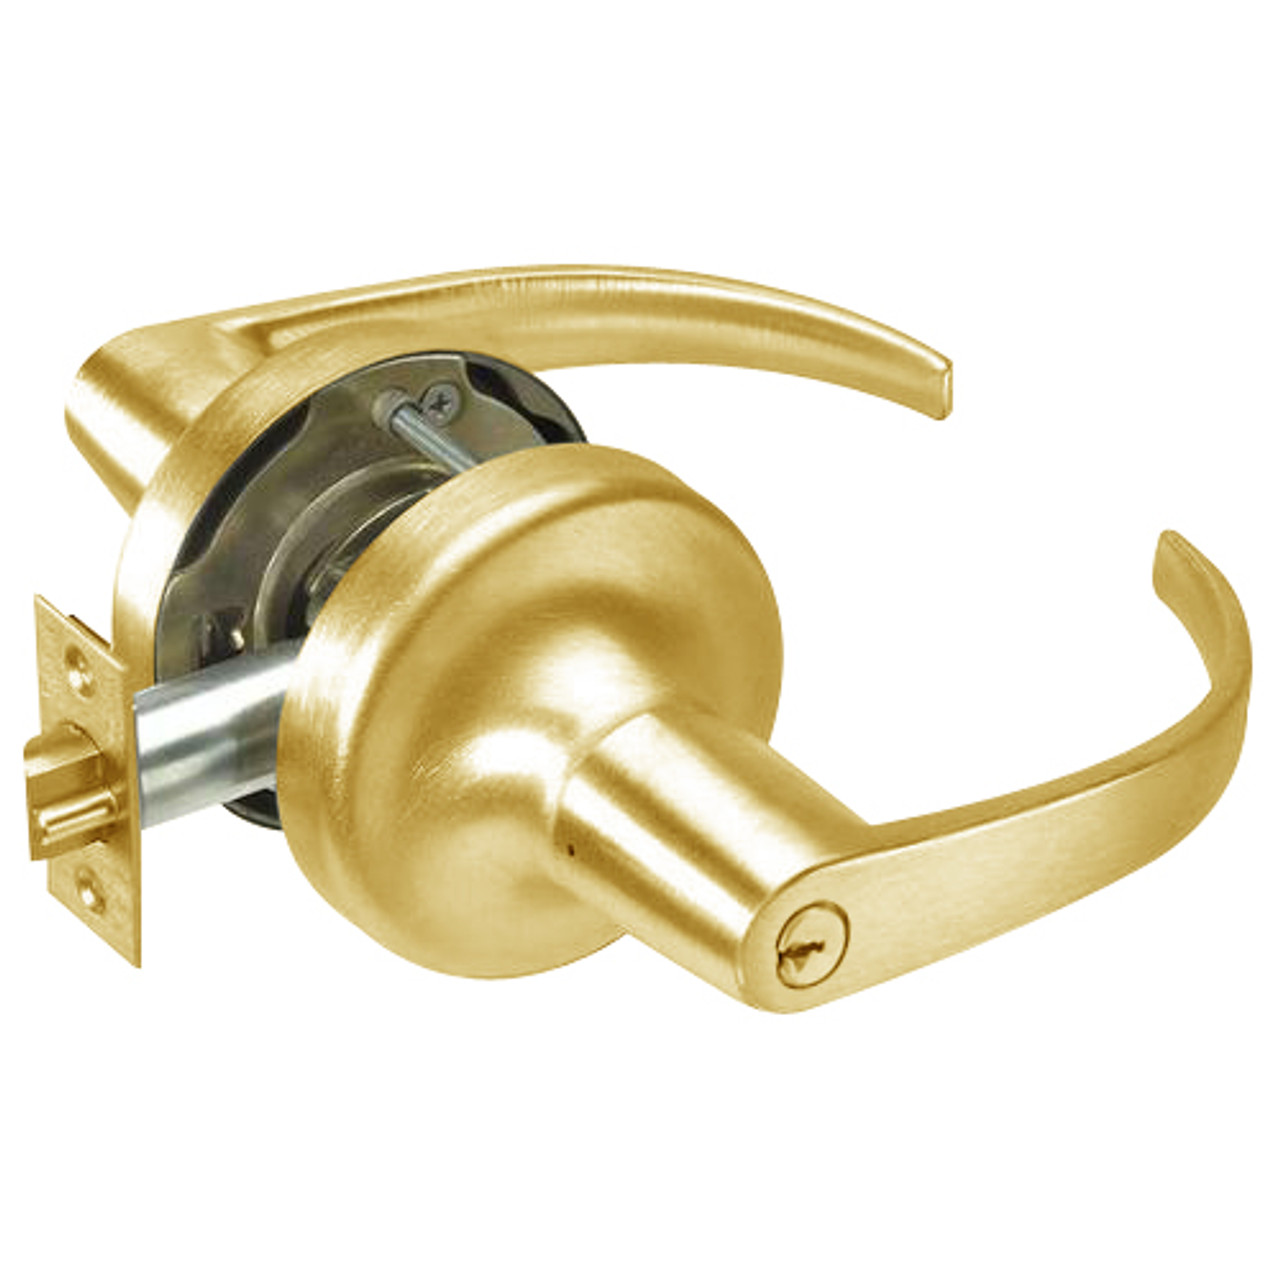 PB5330LN-605 Yale 5300LN Series Double Cylinder Utility or Institutional Cylindrical Lock with Pacific Beach Lever in Bright Brass